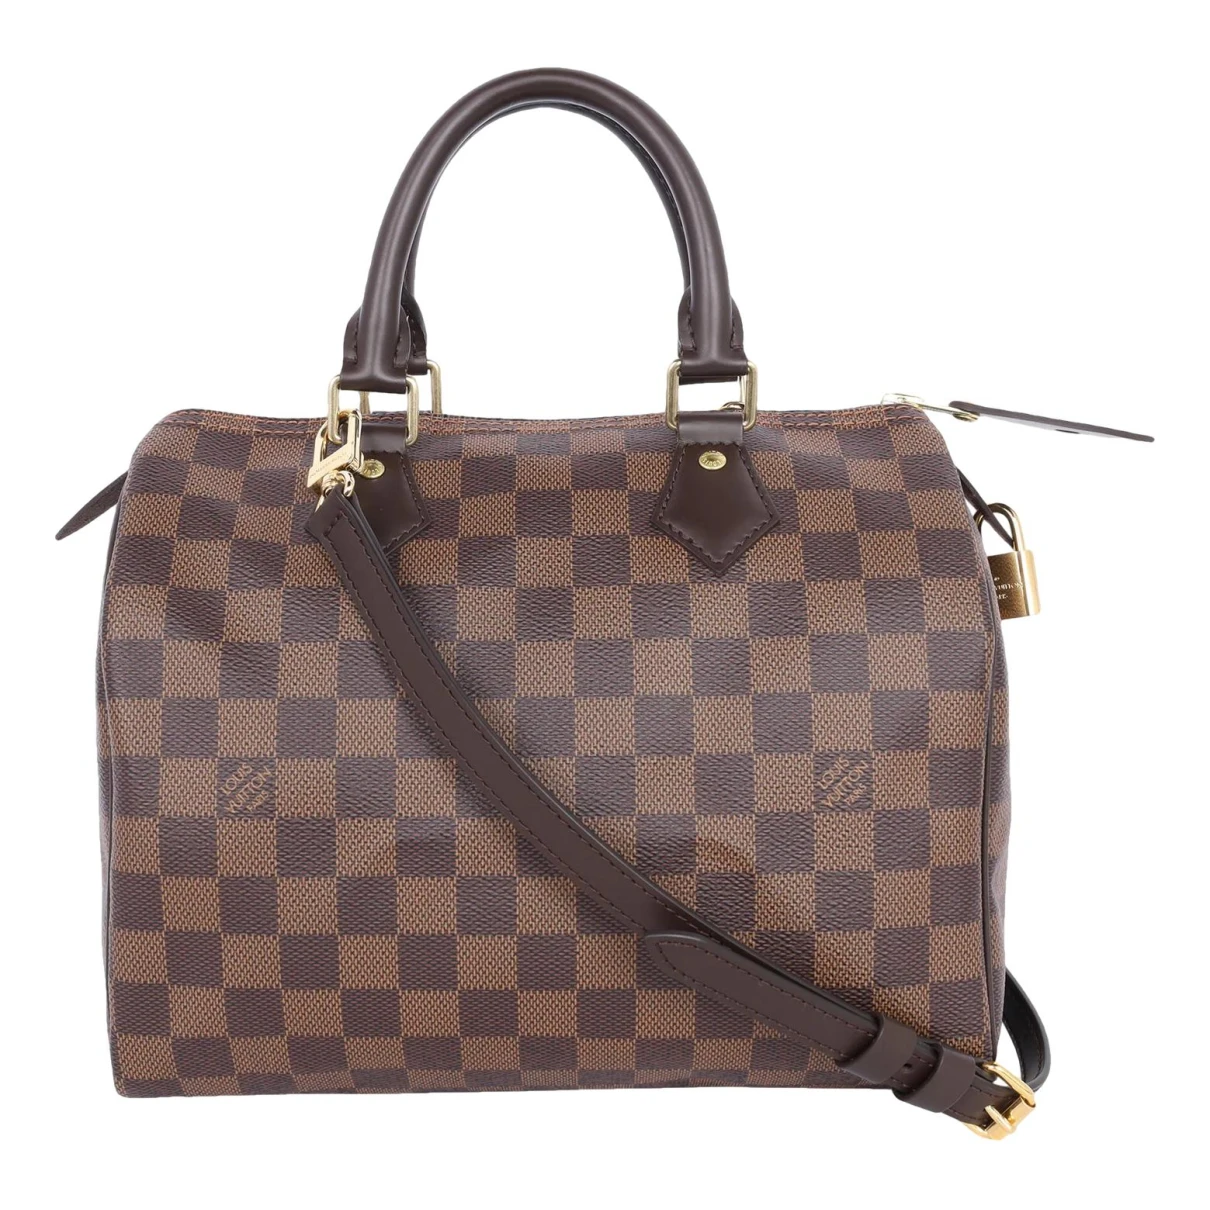 Pre-owned Louis Vuitton Speedy Leather Satchel In Brown